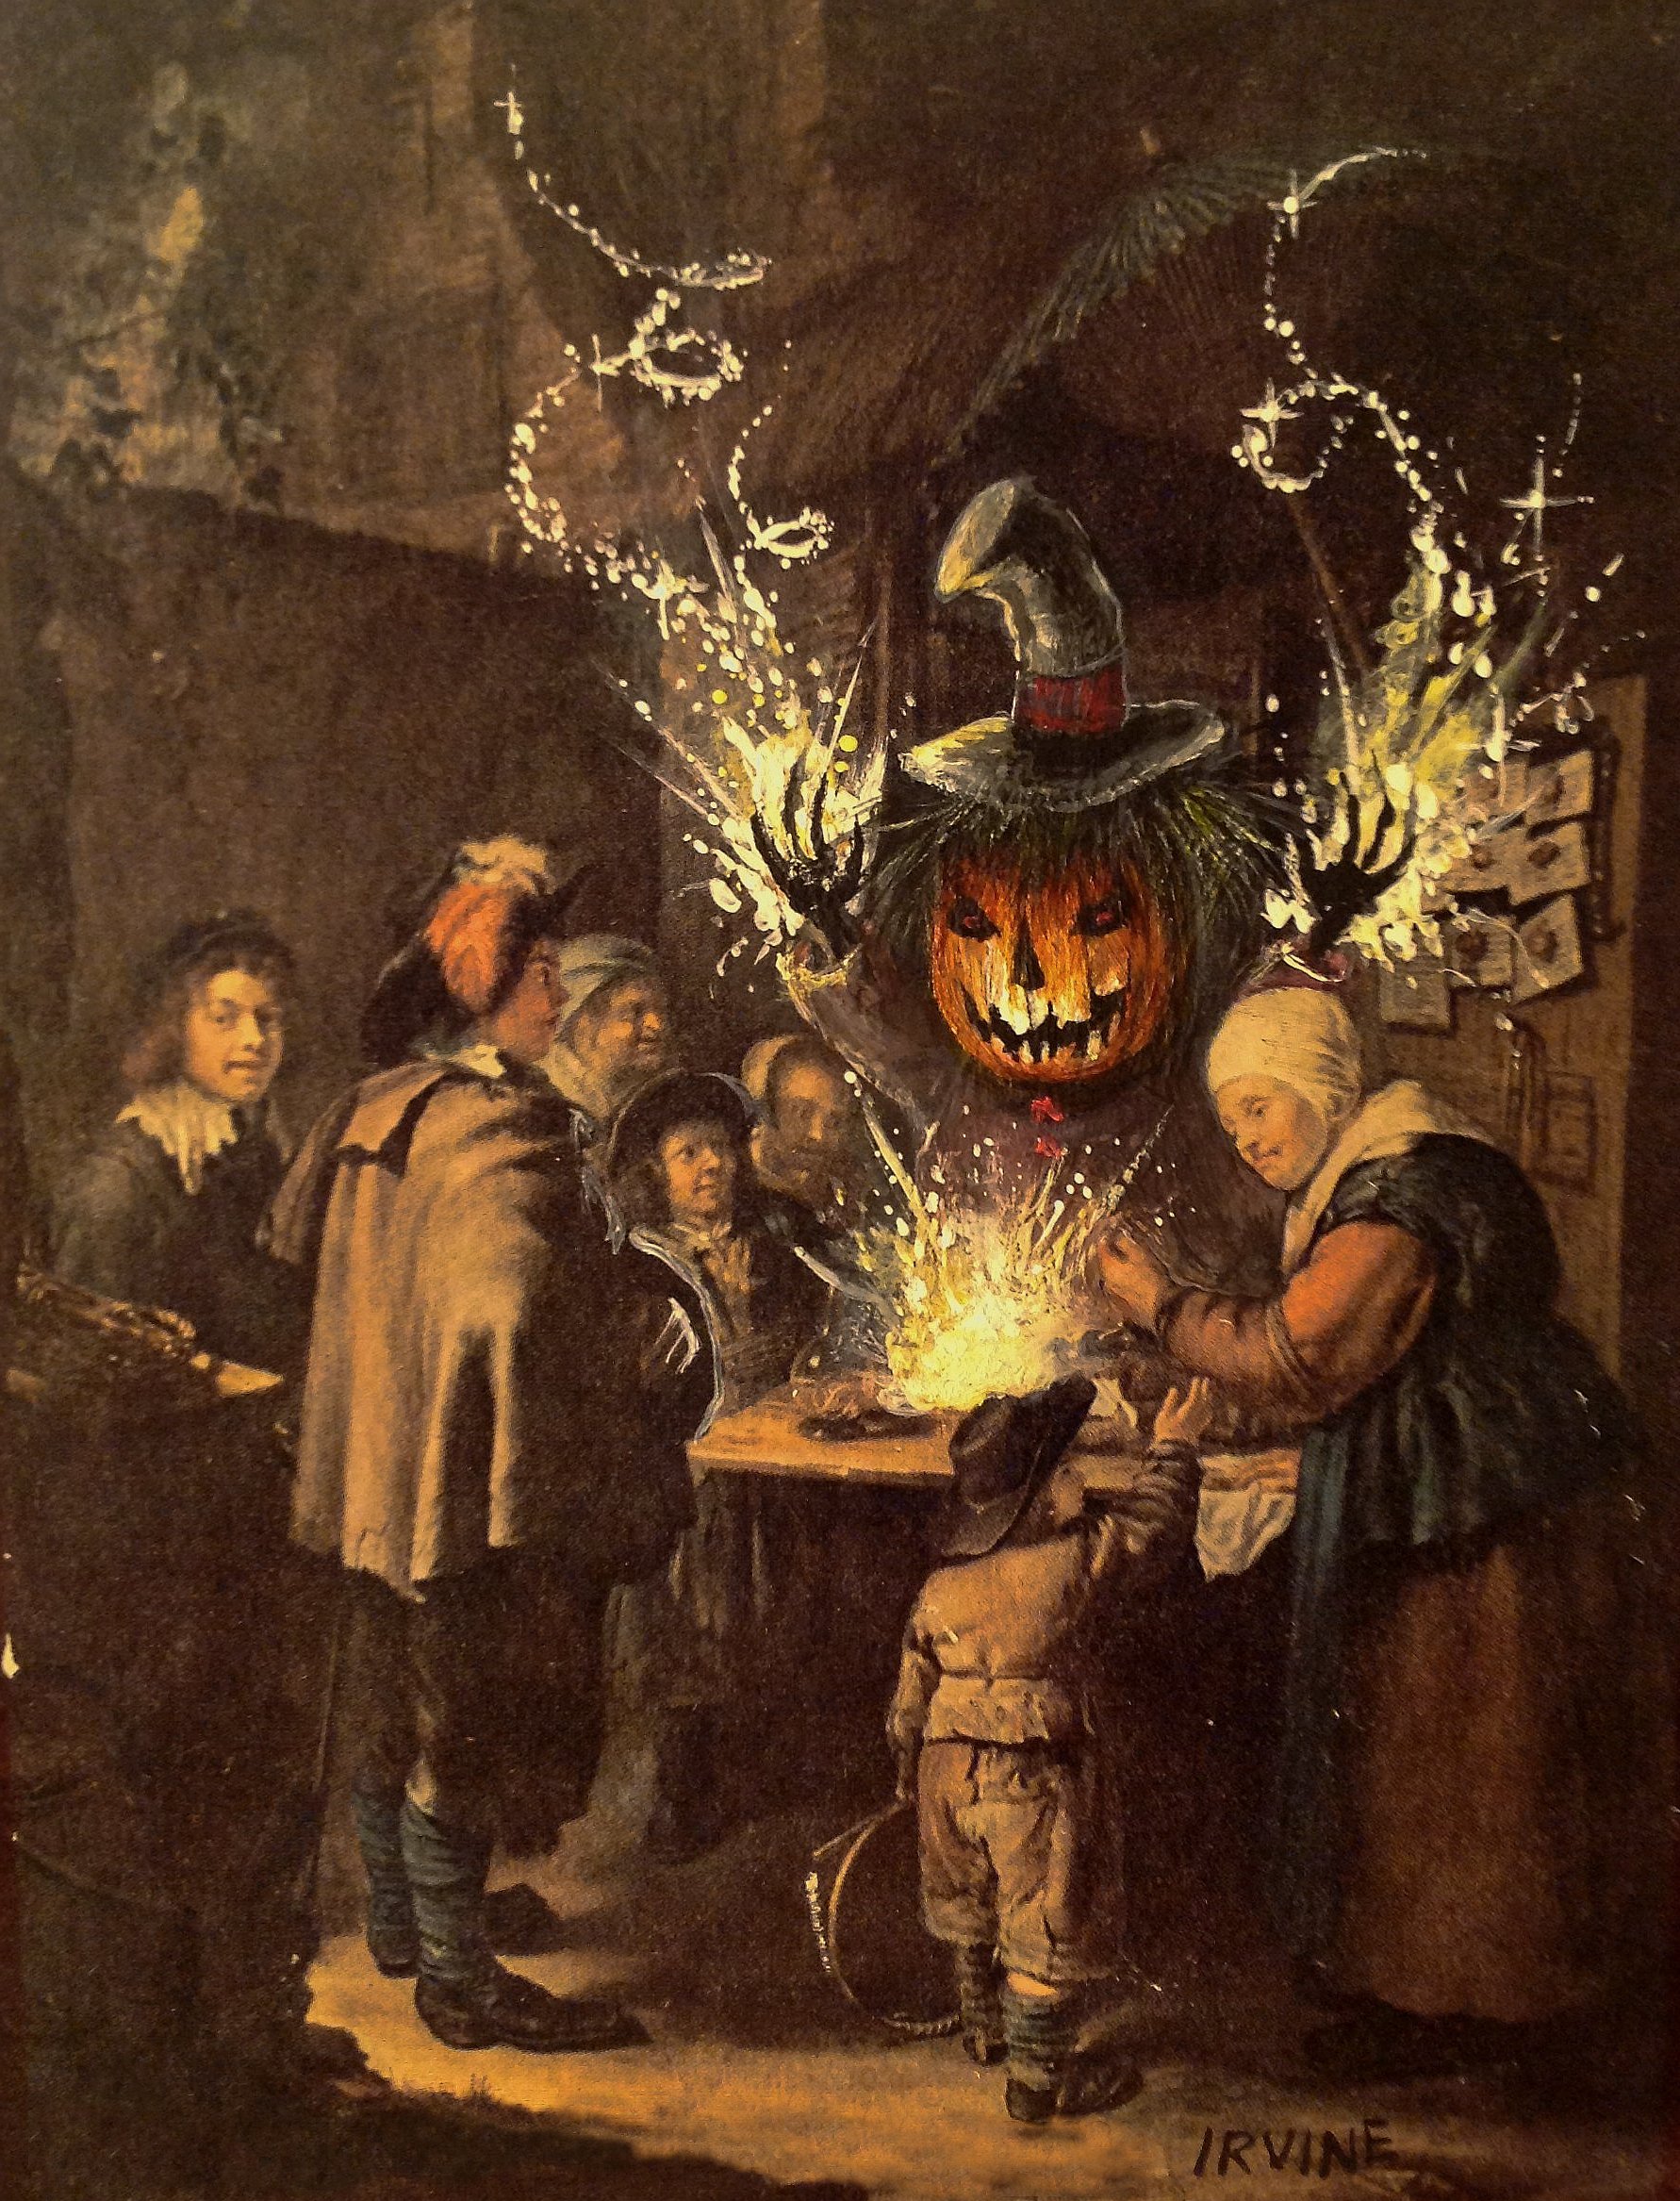 painting of seven people gathered around small table. a person with a pumpkin head has been added and appears to be doing magic with their hands. gold colors fly out from their hands.